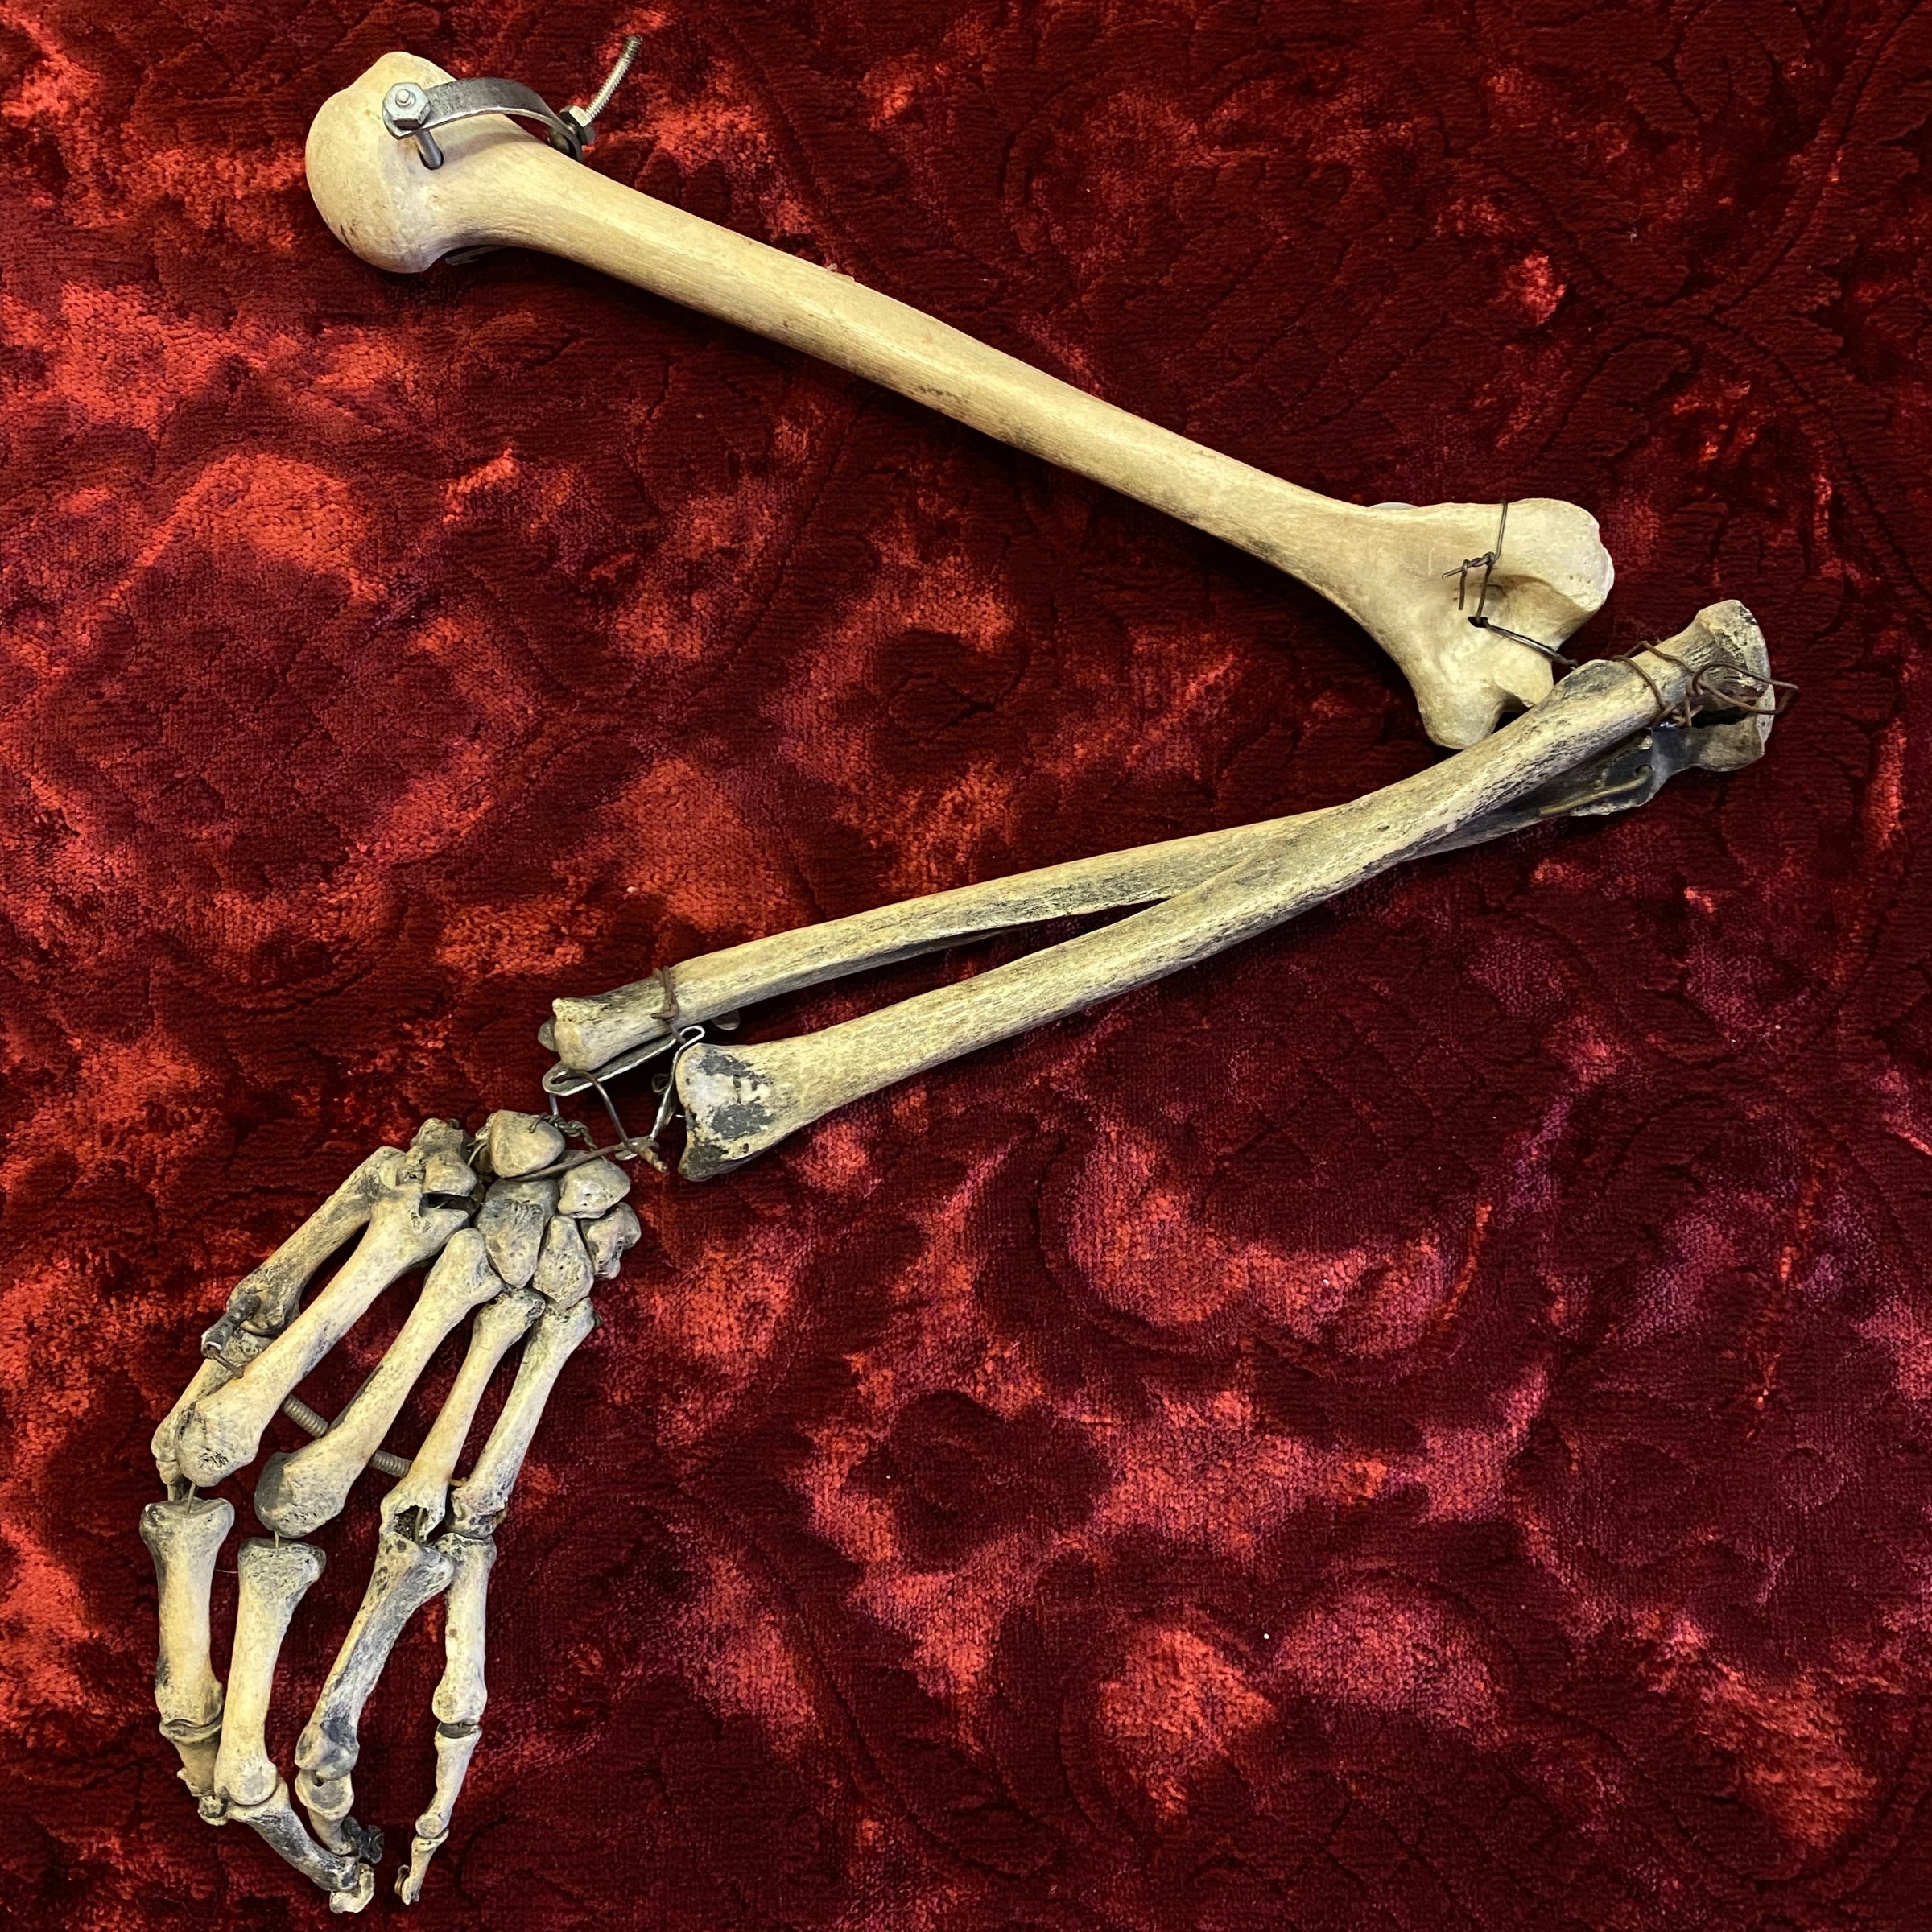 real skeleton hand and arm